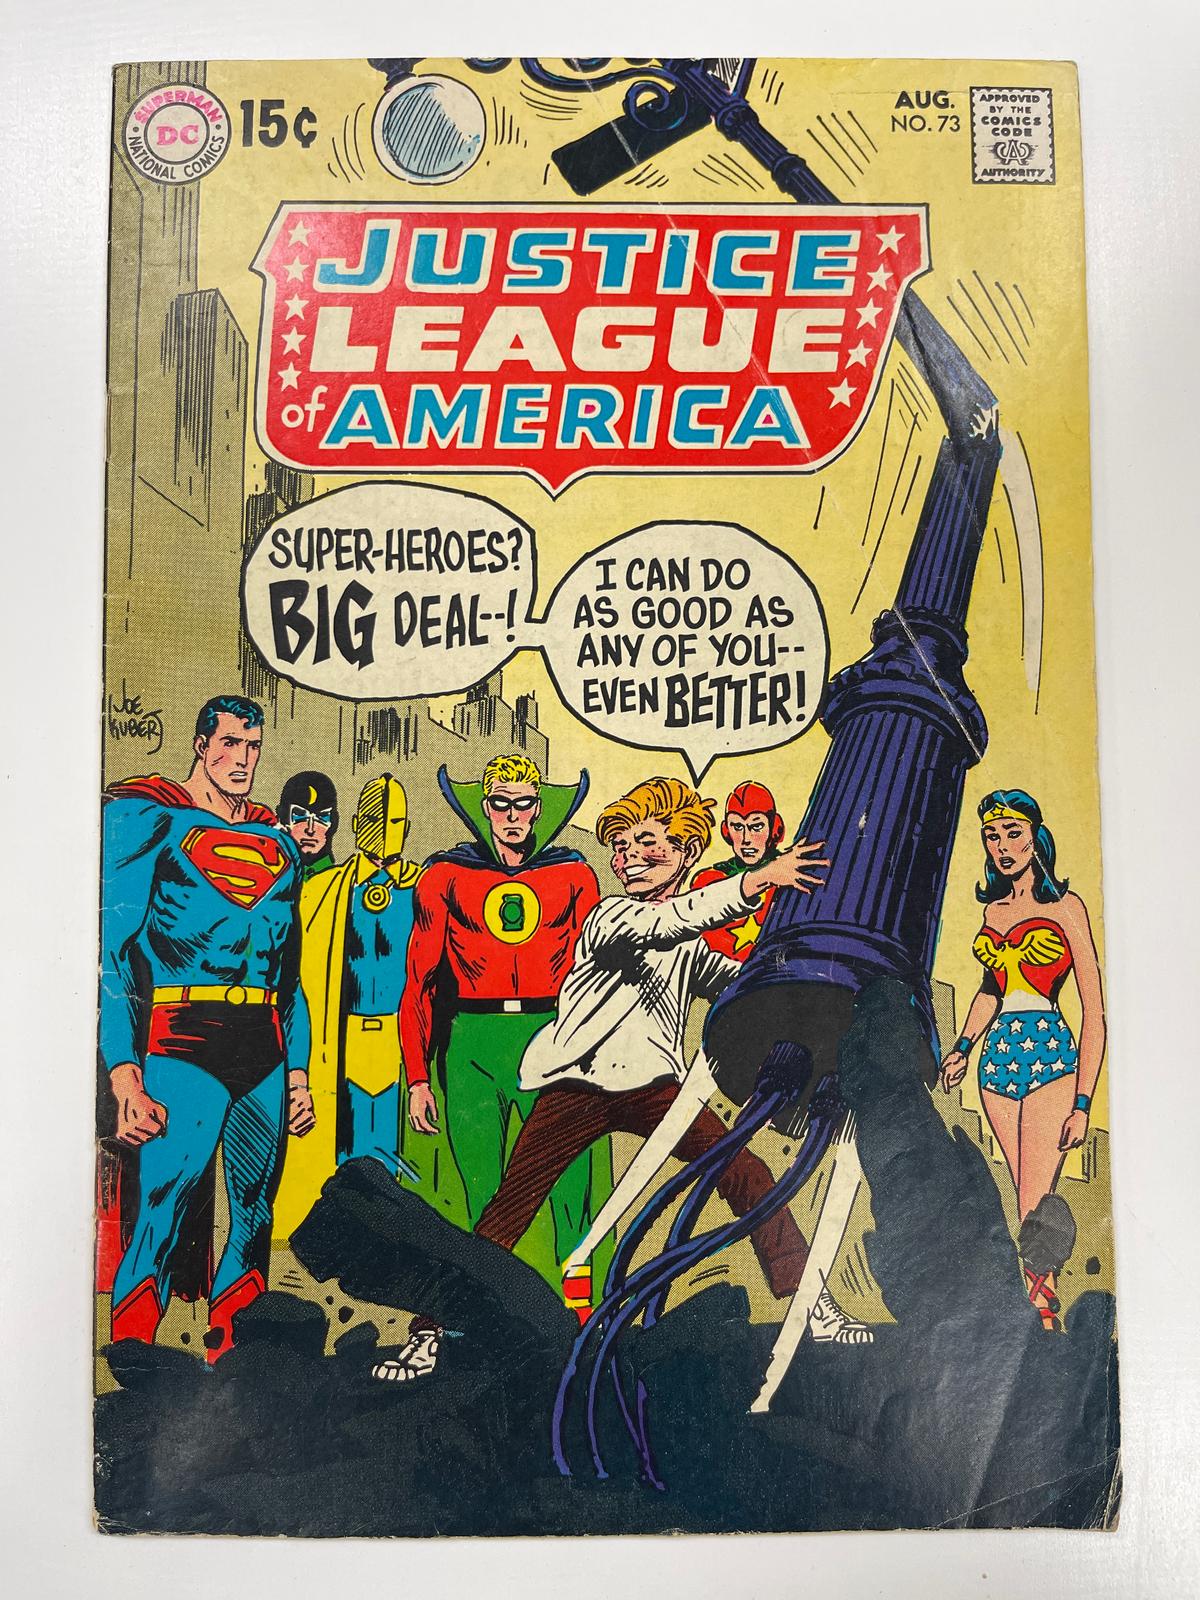 JUSTICE LEAGUE OF AMERICA #73 CLASSIC KUBERT COVER